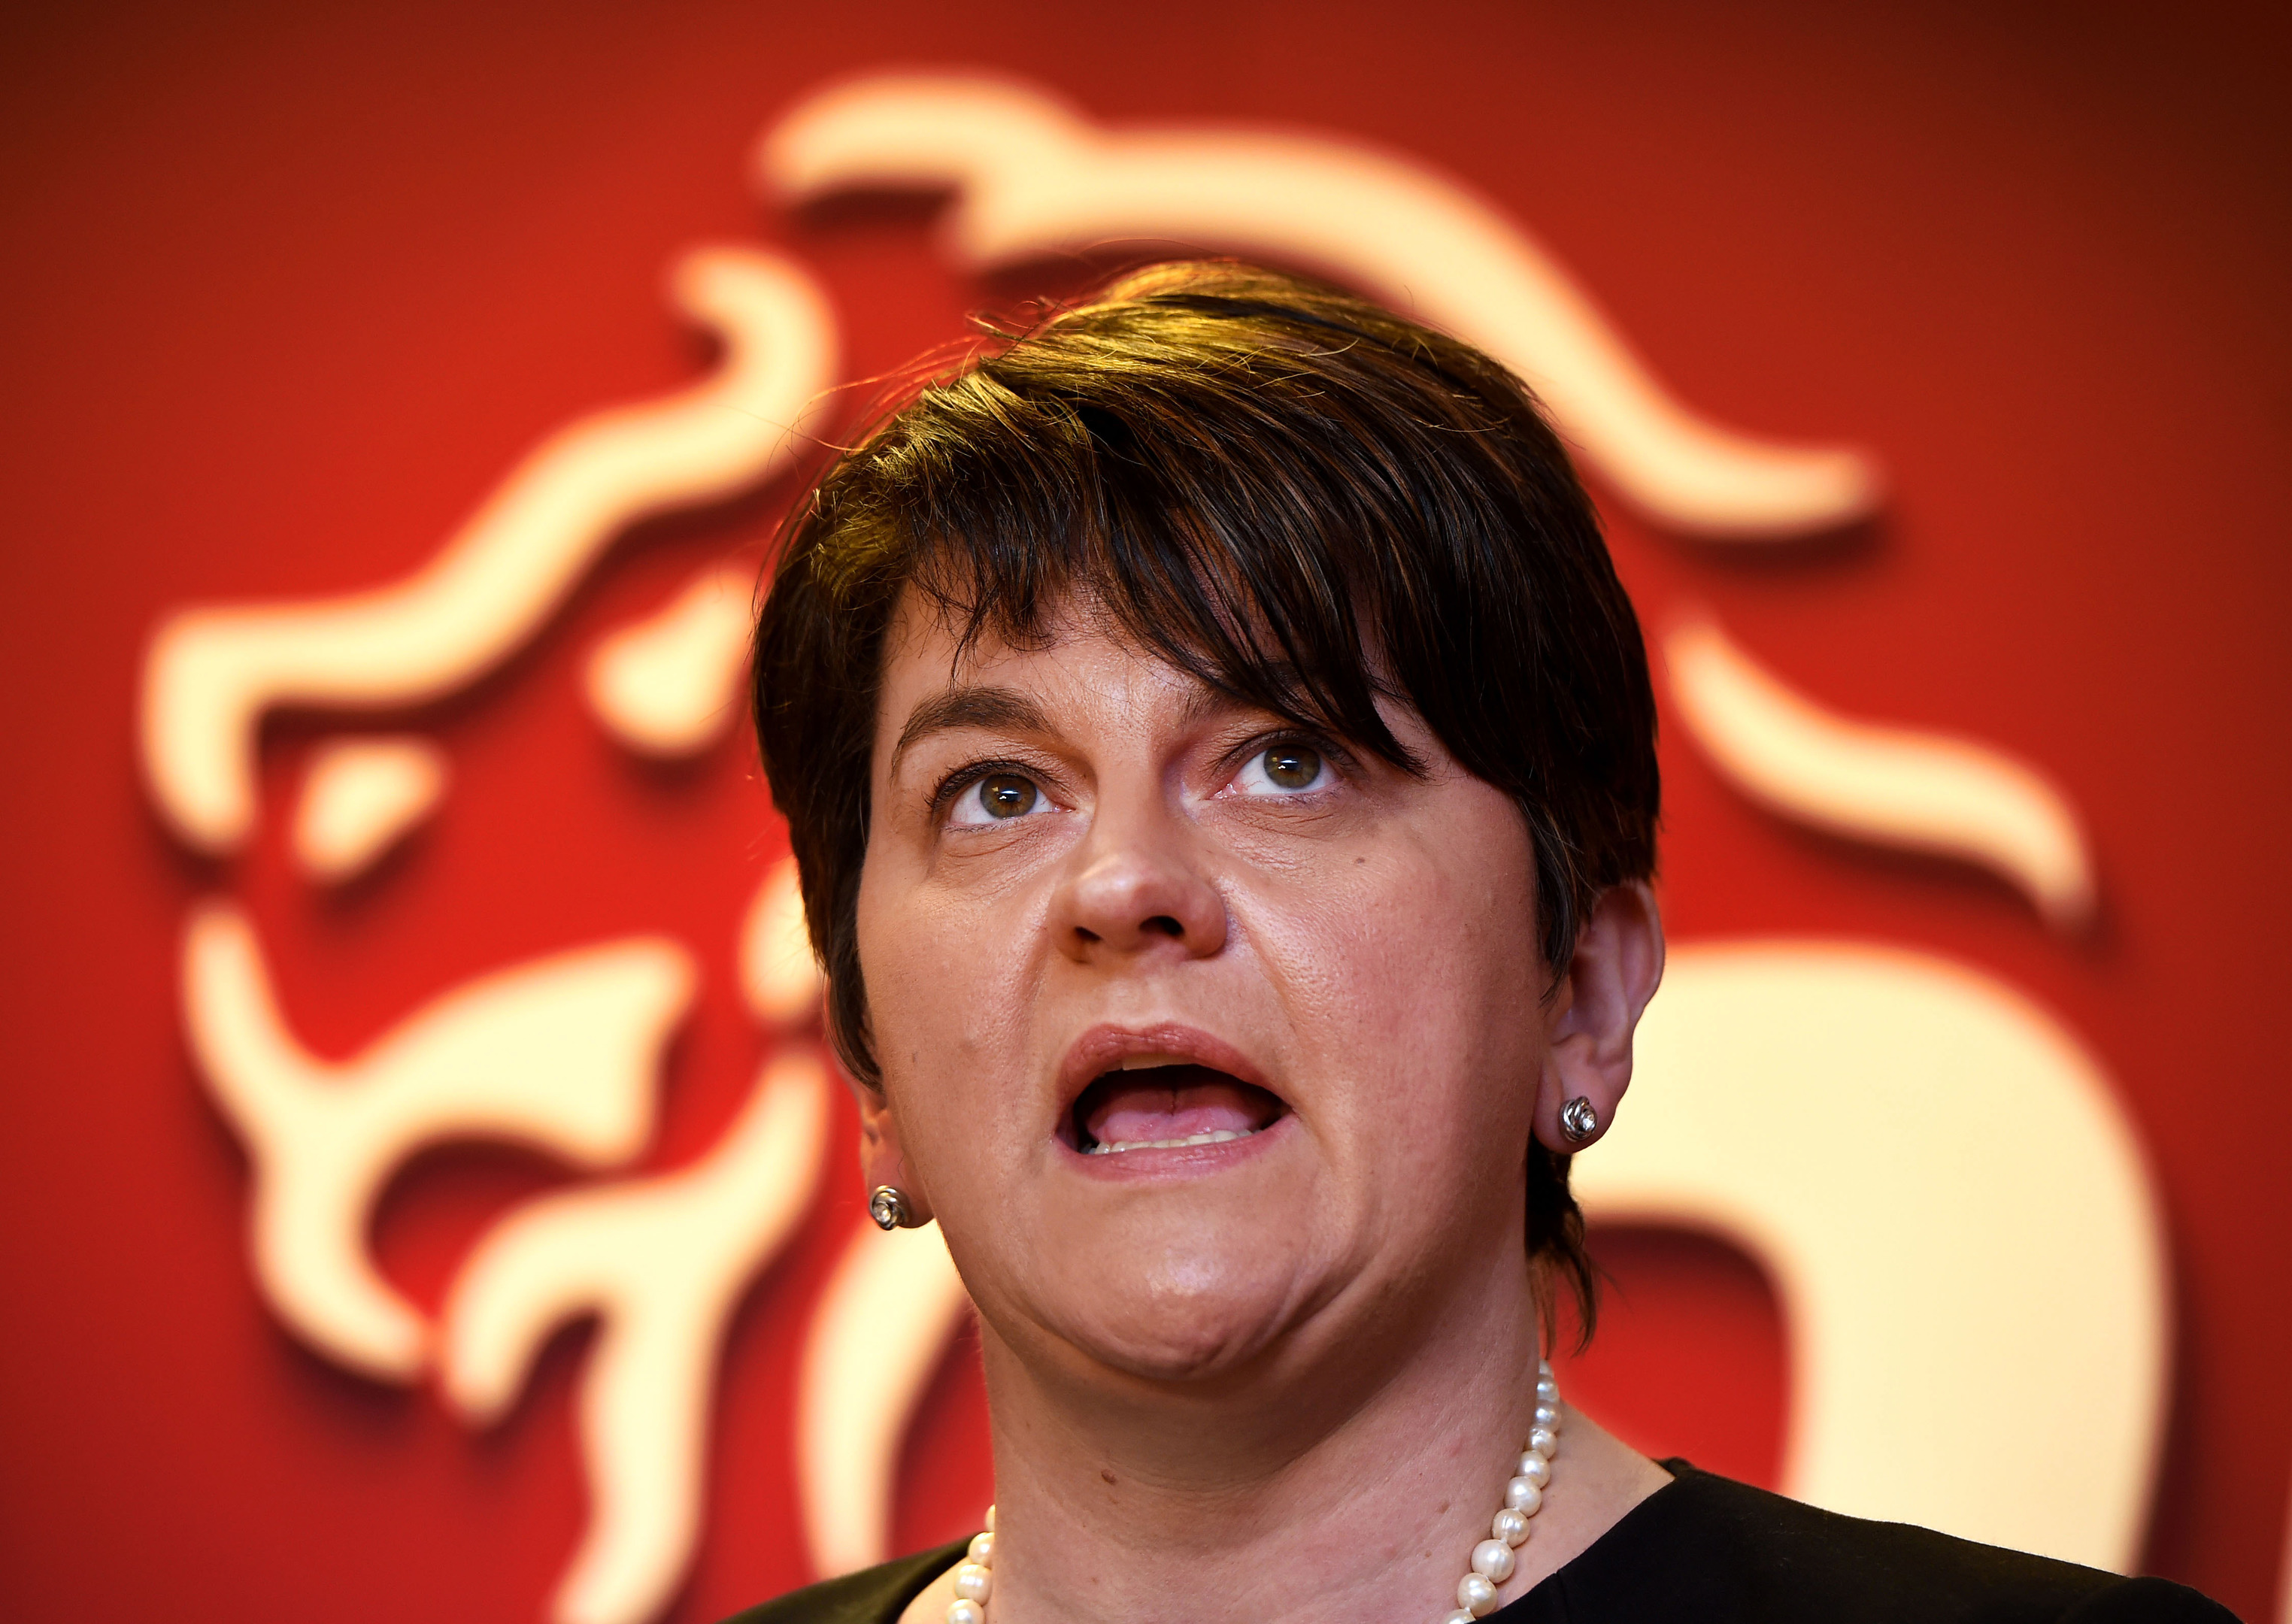 DUP leader and Northern Ireland First Minister Arlene Foster.